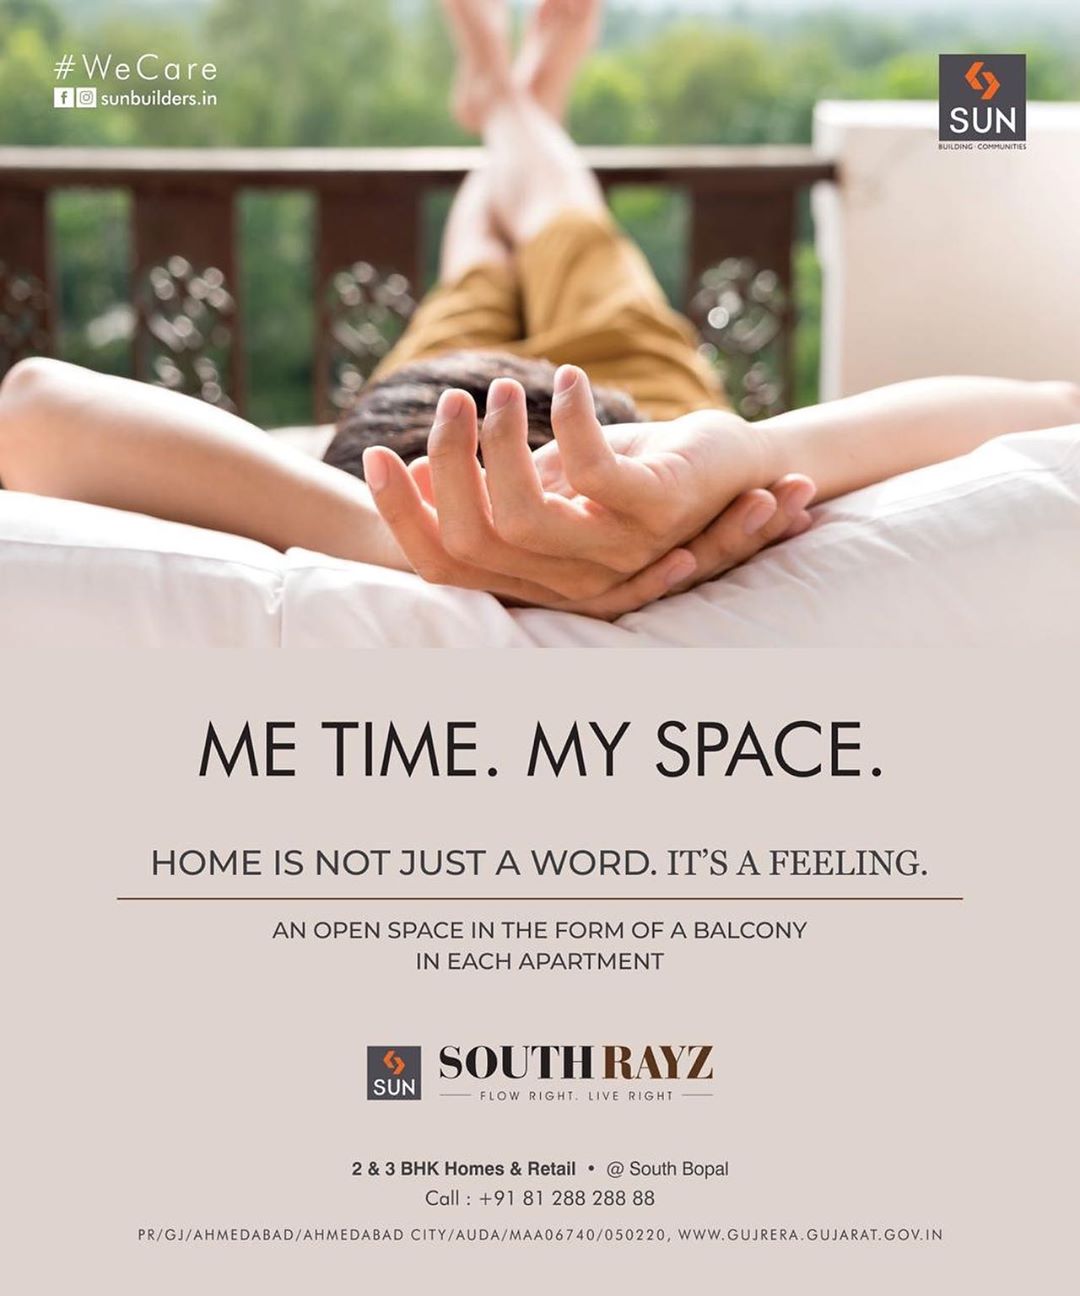 Nearly 4 decades of trust, quality construction, ethical practice and commitment is what you get with Us. 
Sun SouthRayz, A Rightly priced smartly designed 2 & 3 BHK homes with balcony space
ensuring quality time and a fulfilling life.

For Details Call +91 987932060. 
#retail #apartments #southbopal #budgethomes #2bhk #3bhk #safeinvestment #qualityconstruction #ethics #realestateahmedabad #sunbuildersgroup #staysafe #wecare